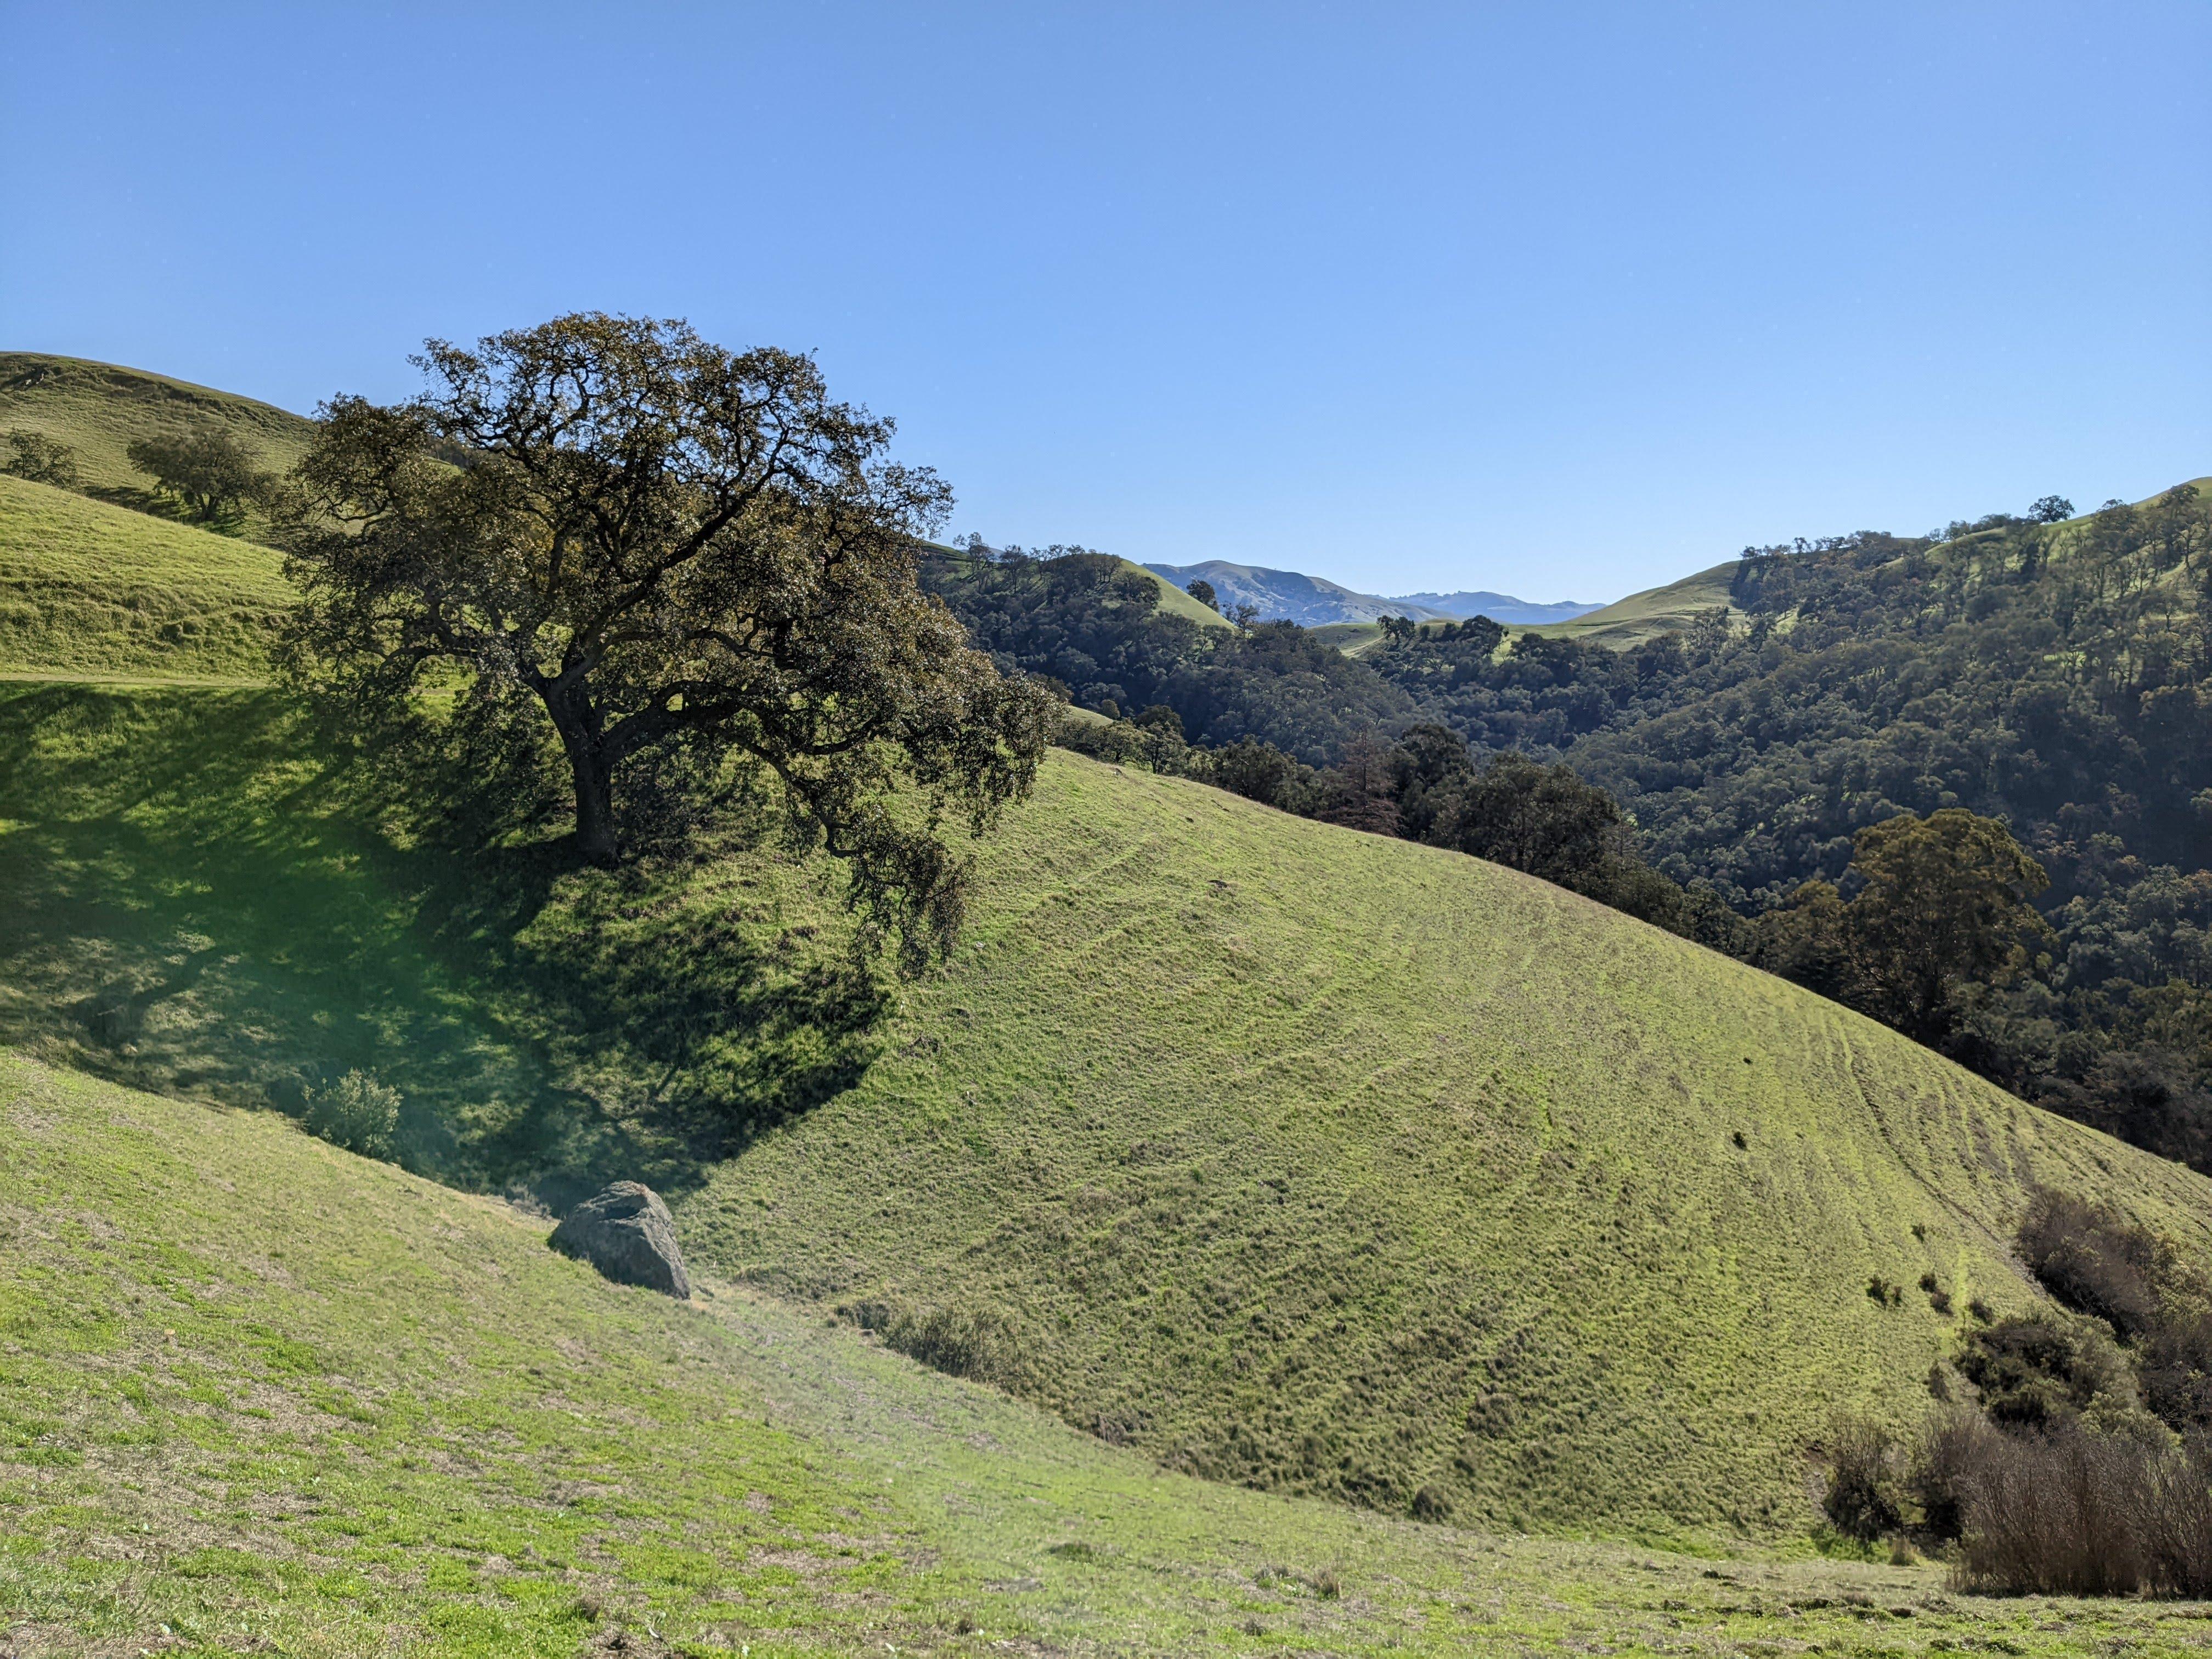 As you climb from the gorge views of Sunol wilderness start to open up